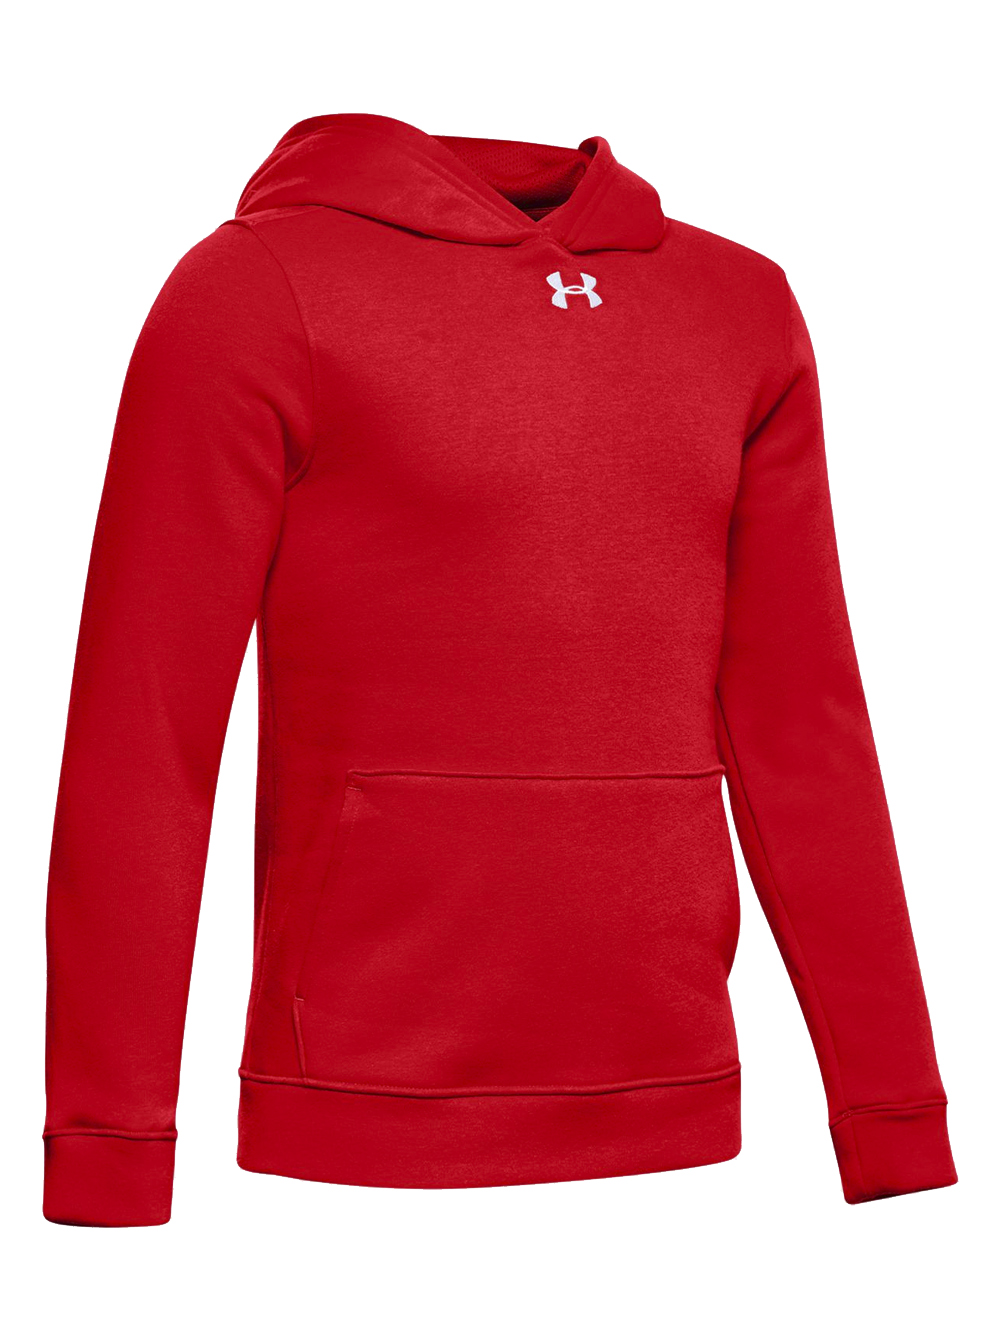 Under Armour Youth Hustle Hoody | Midwest Volleyball Warehouse